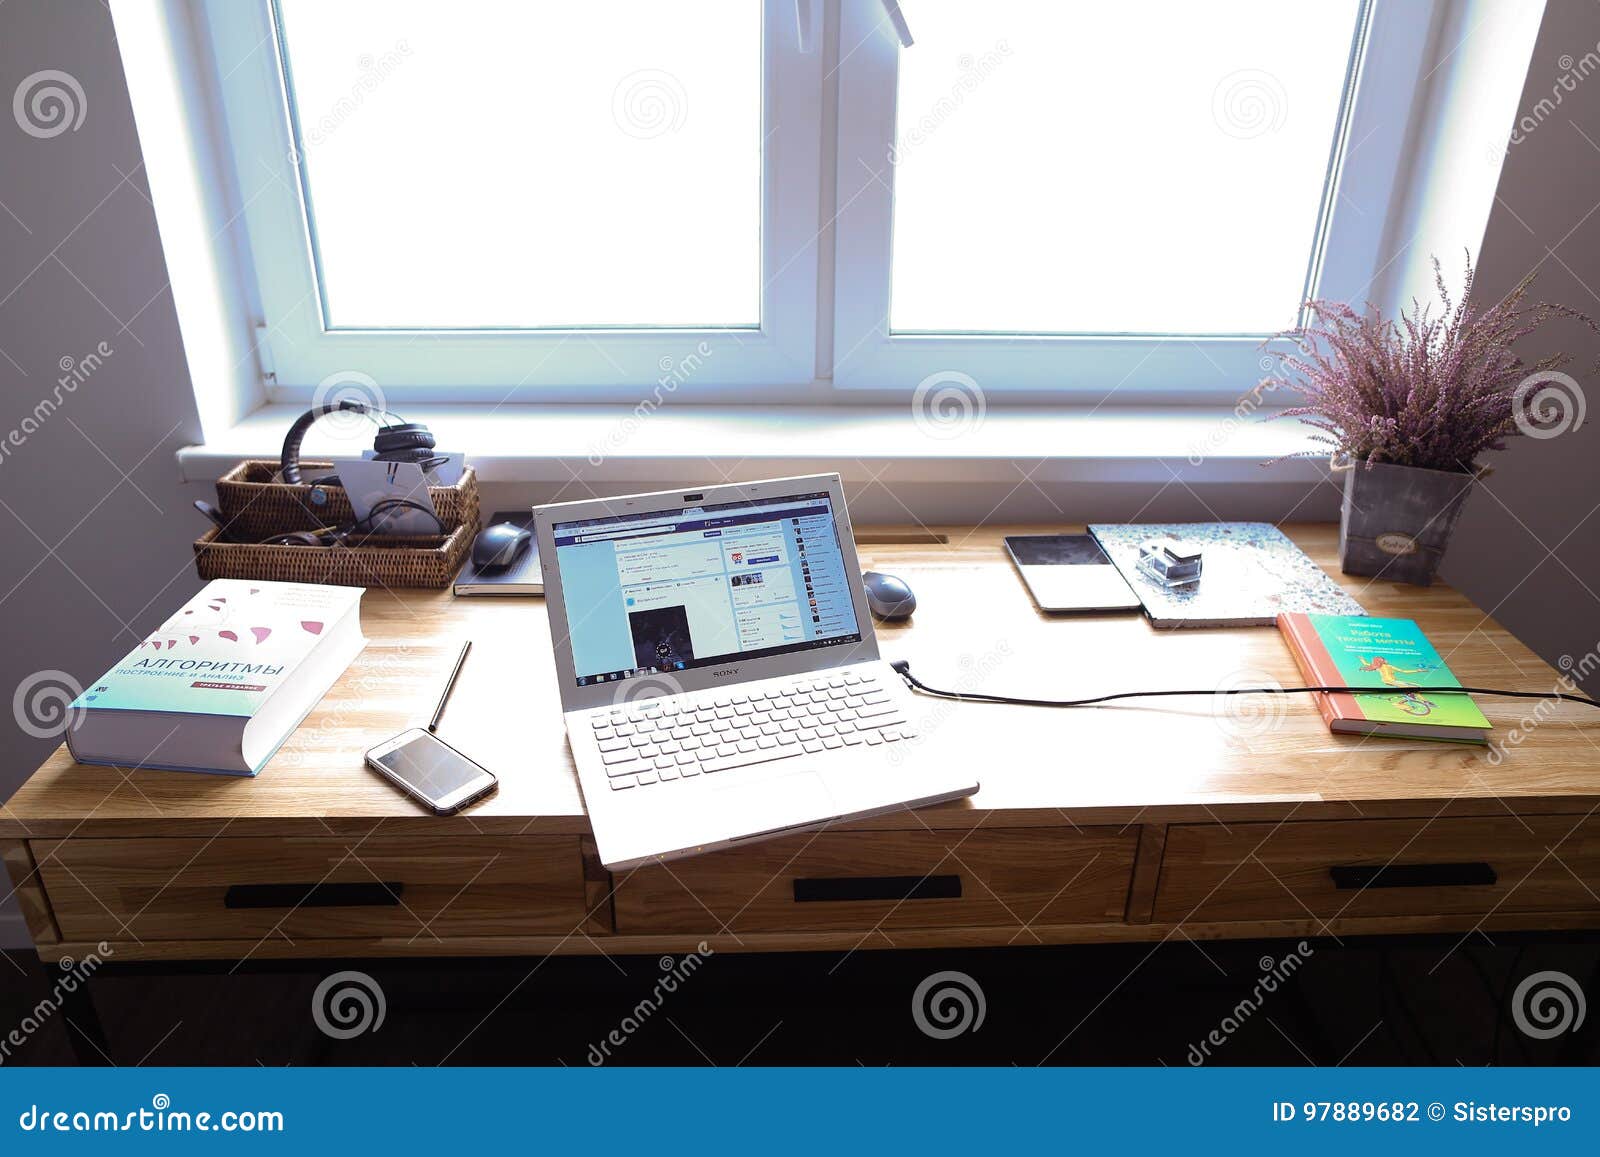 Design And Equipped Working Area For Working In Spacious Room Wi